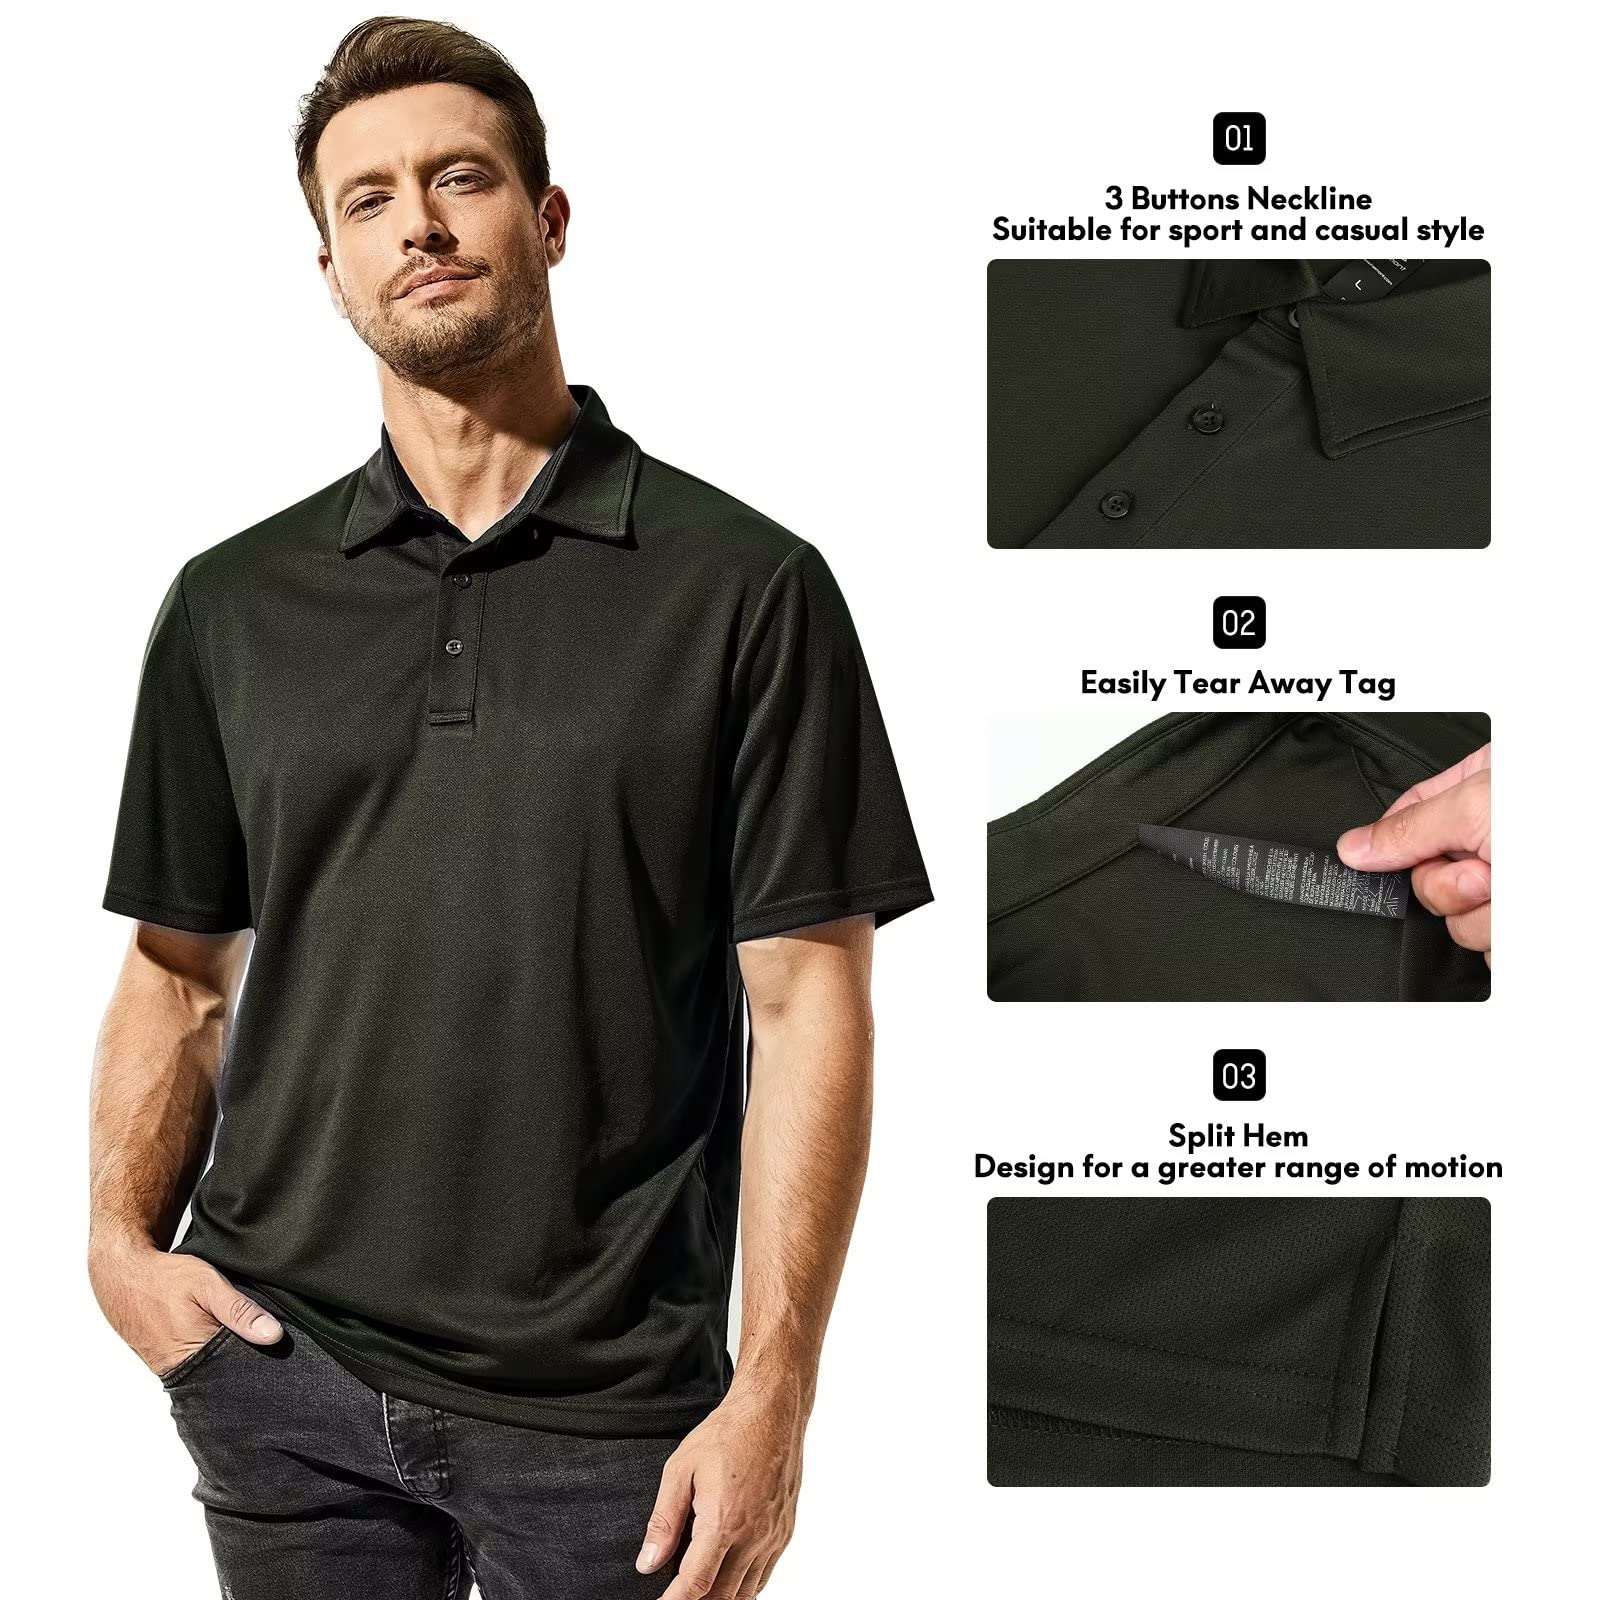 Haimont Polo Shirts for Men Dry Fit Collared Golf Shirts